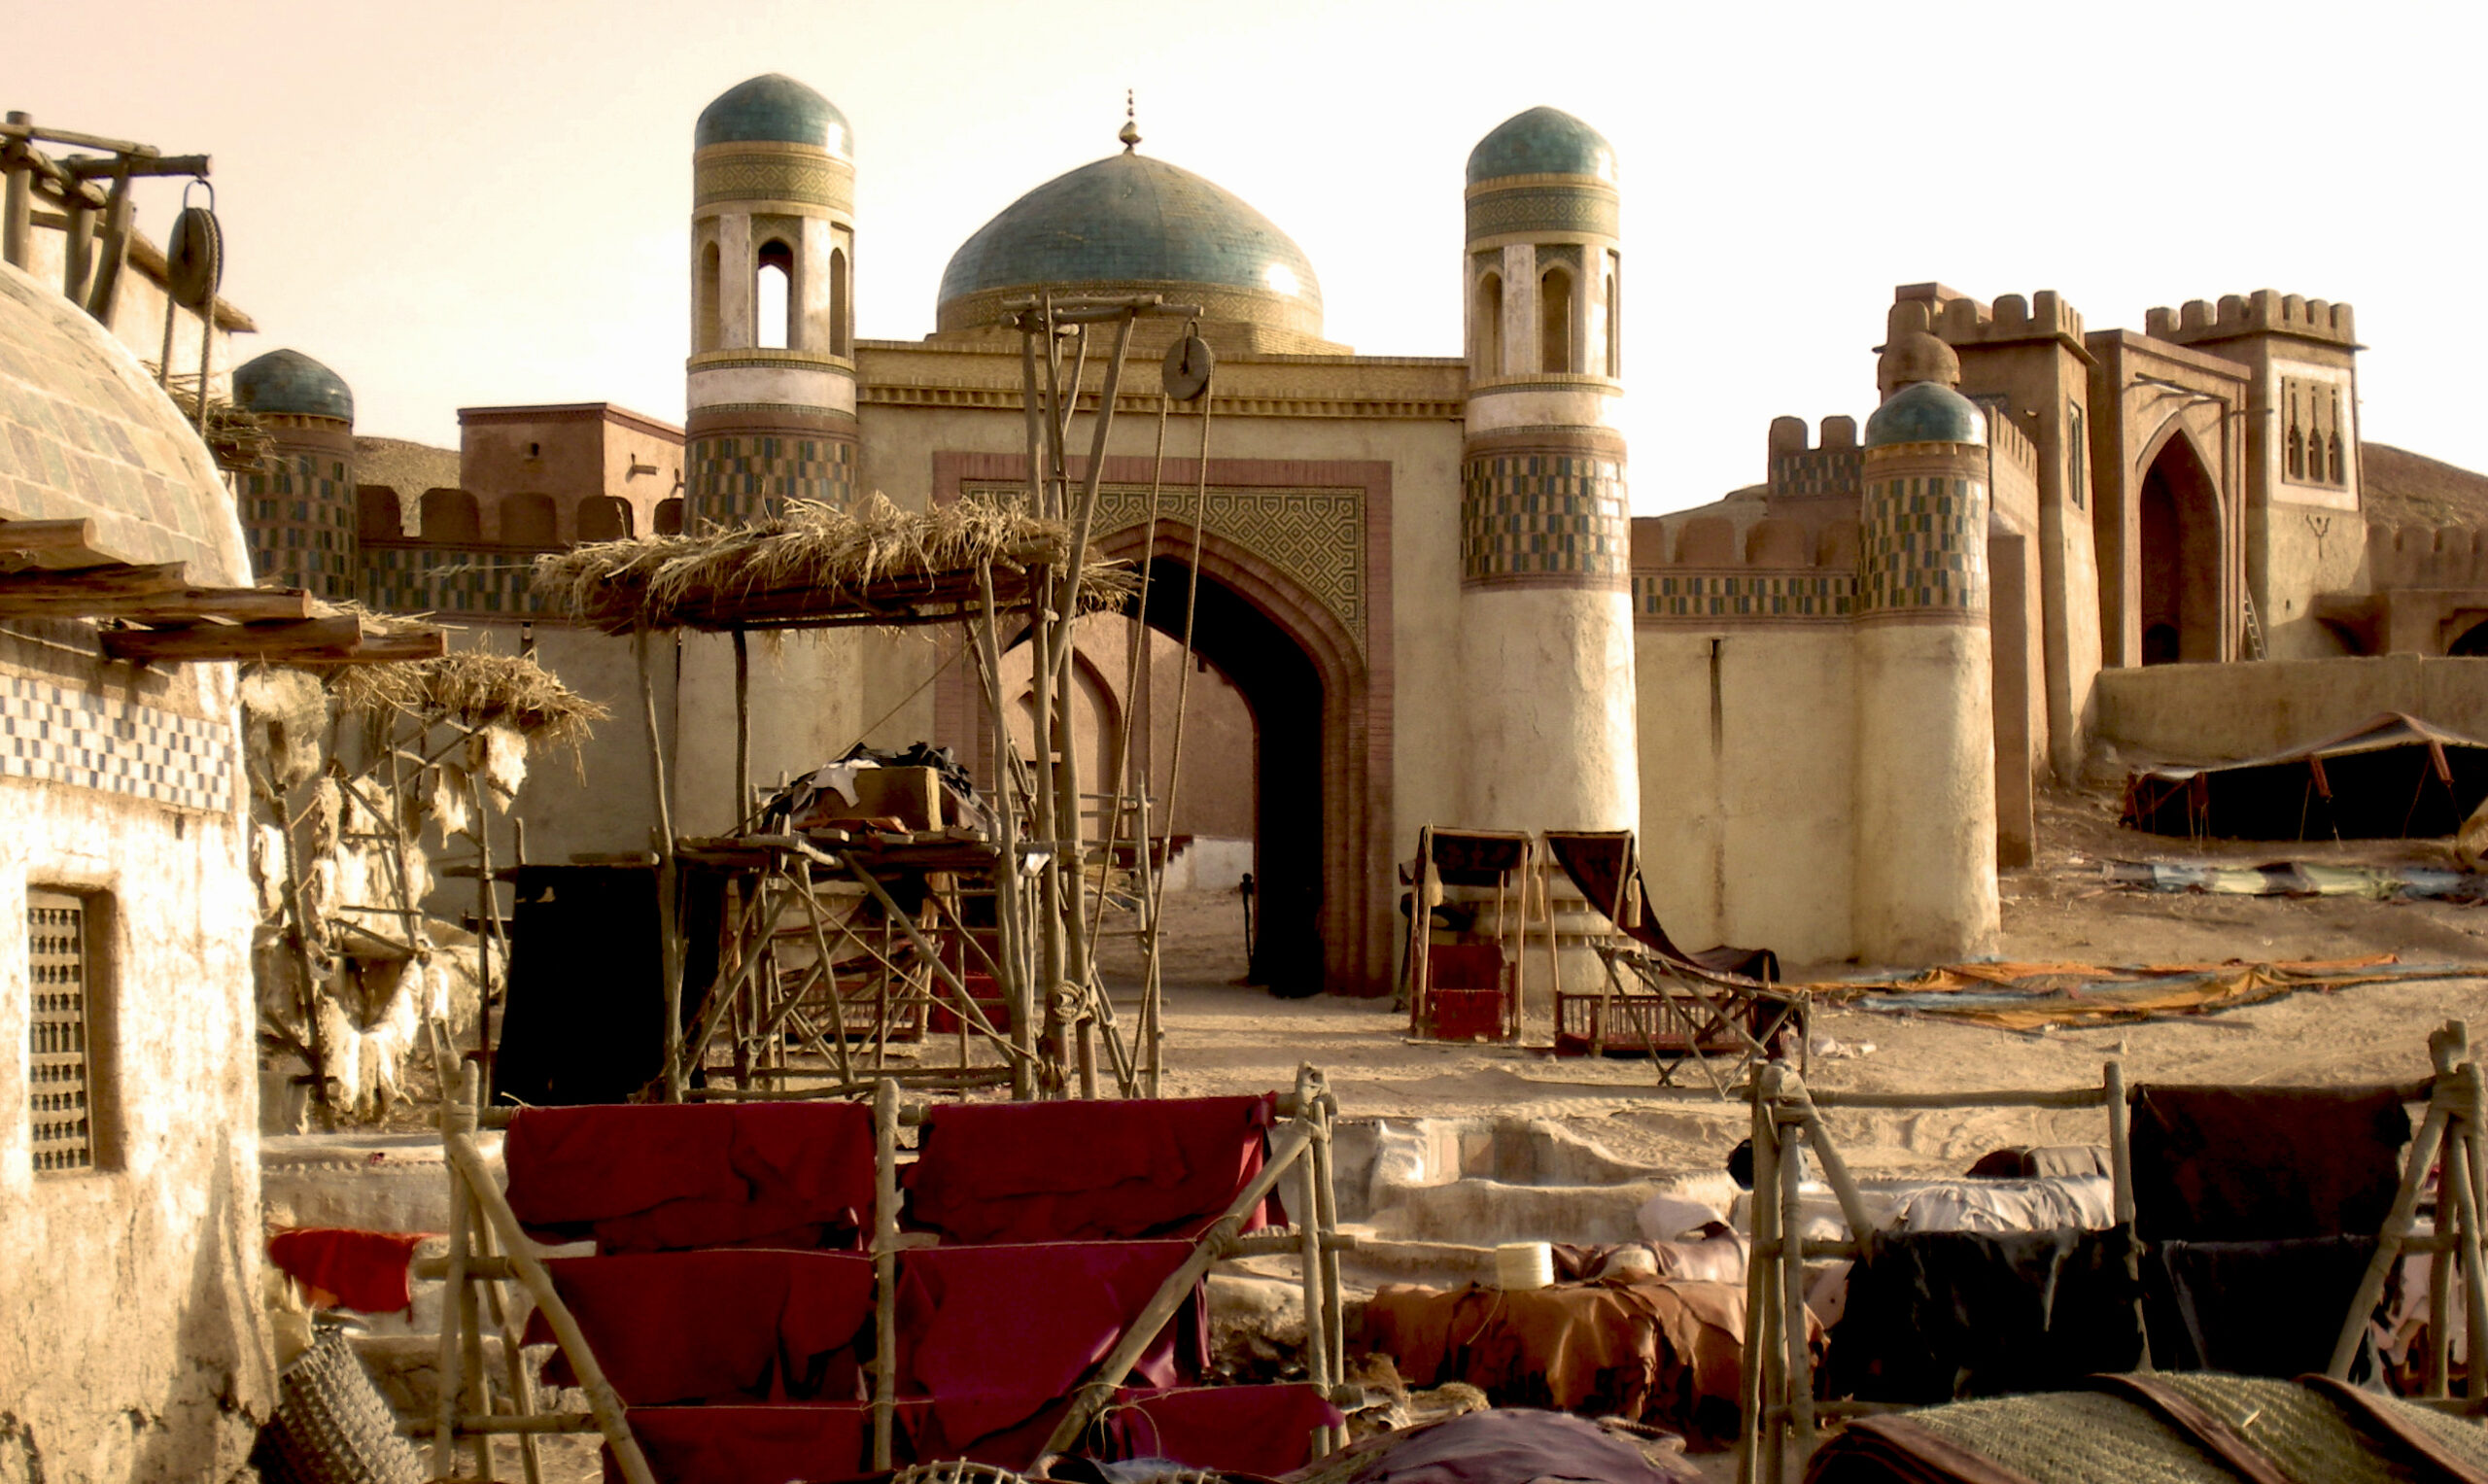 PRINCE OF PERSIA - Directed by Mike Newel - Ext. Nasaf City - ©2010 - Walt Disney Pictures